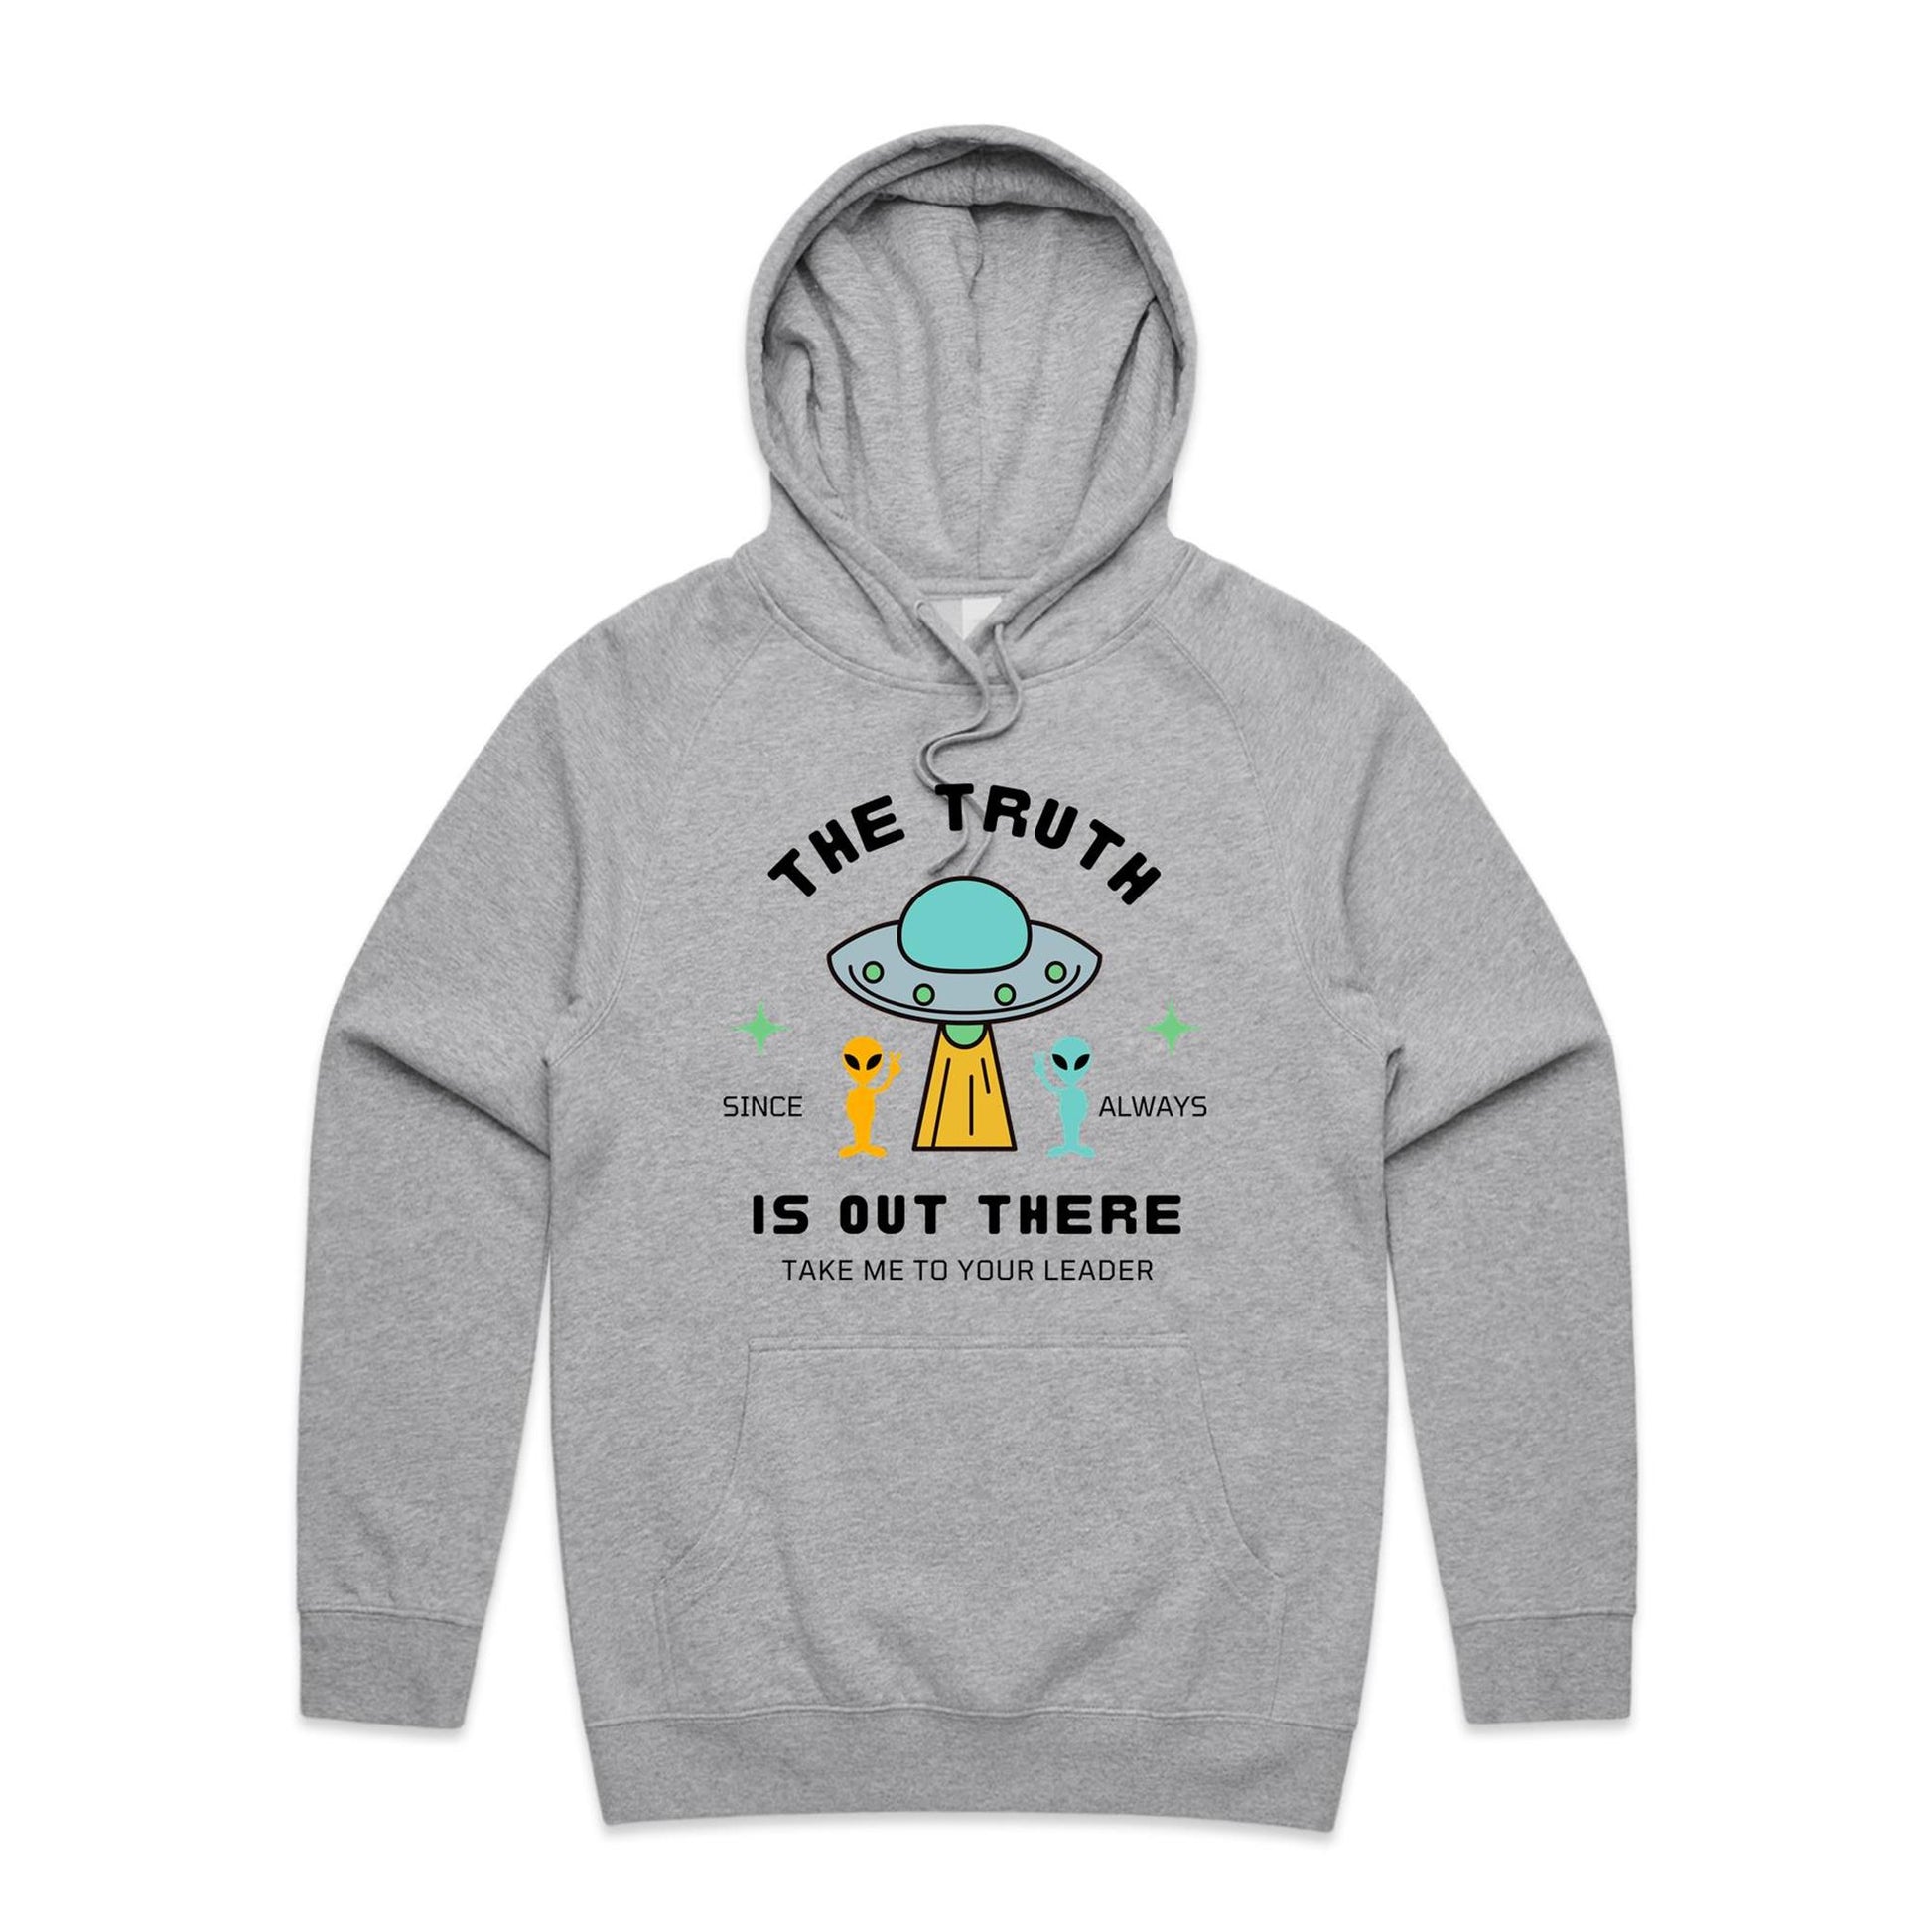 The Truth Is Out There - Supply Hood Grey Marle Mens Supply Hoodie Sci Fi